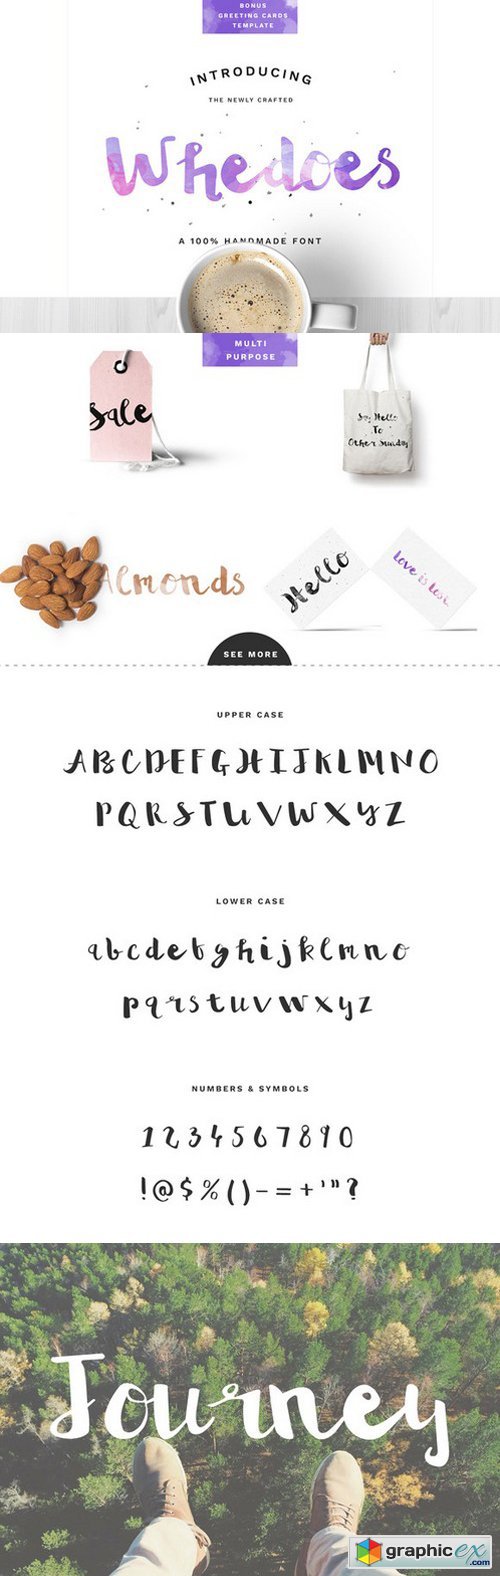 Whedoes Handmade Font 